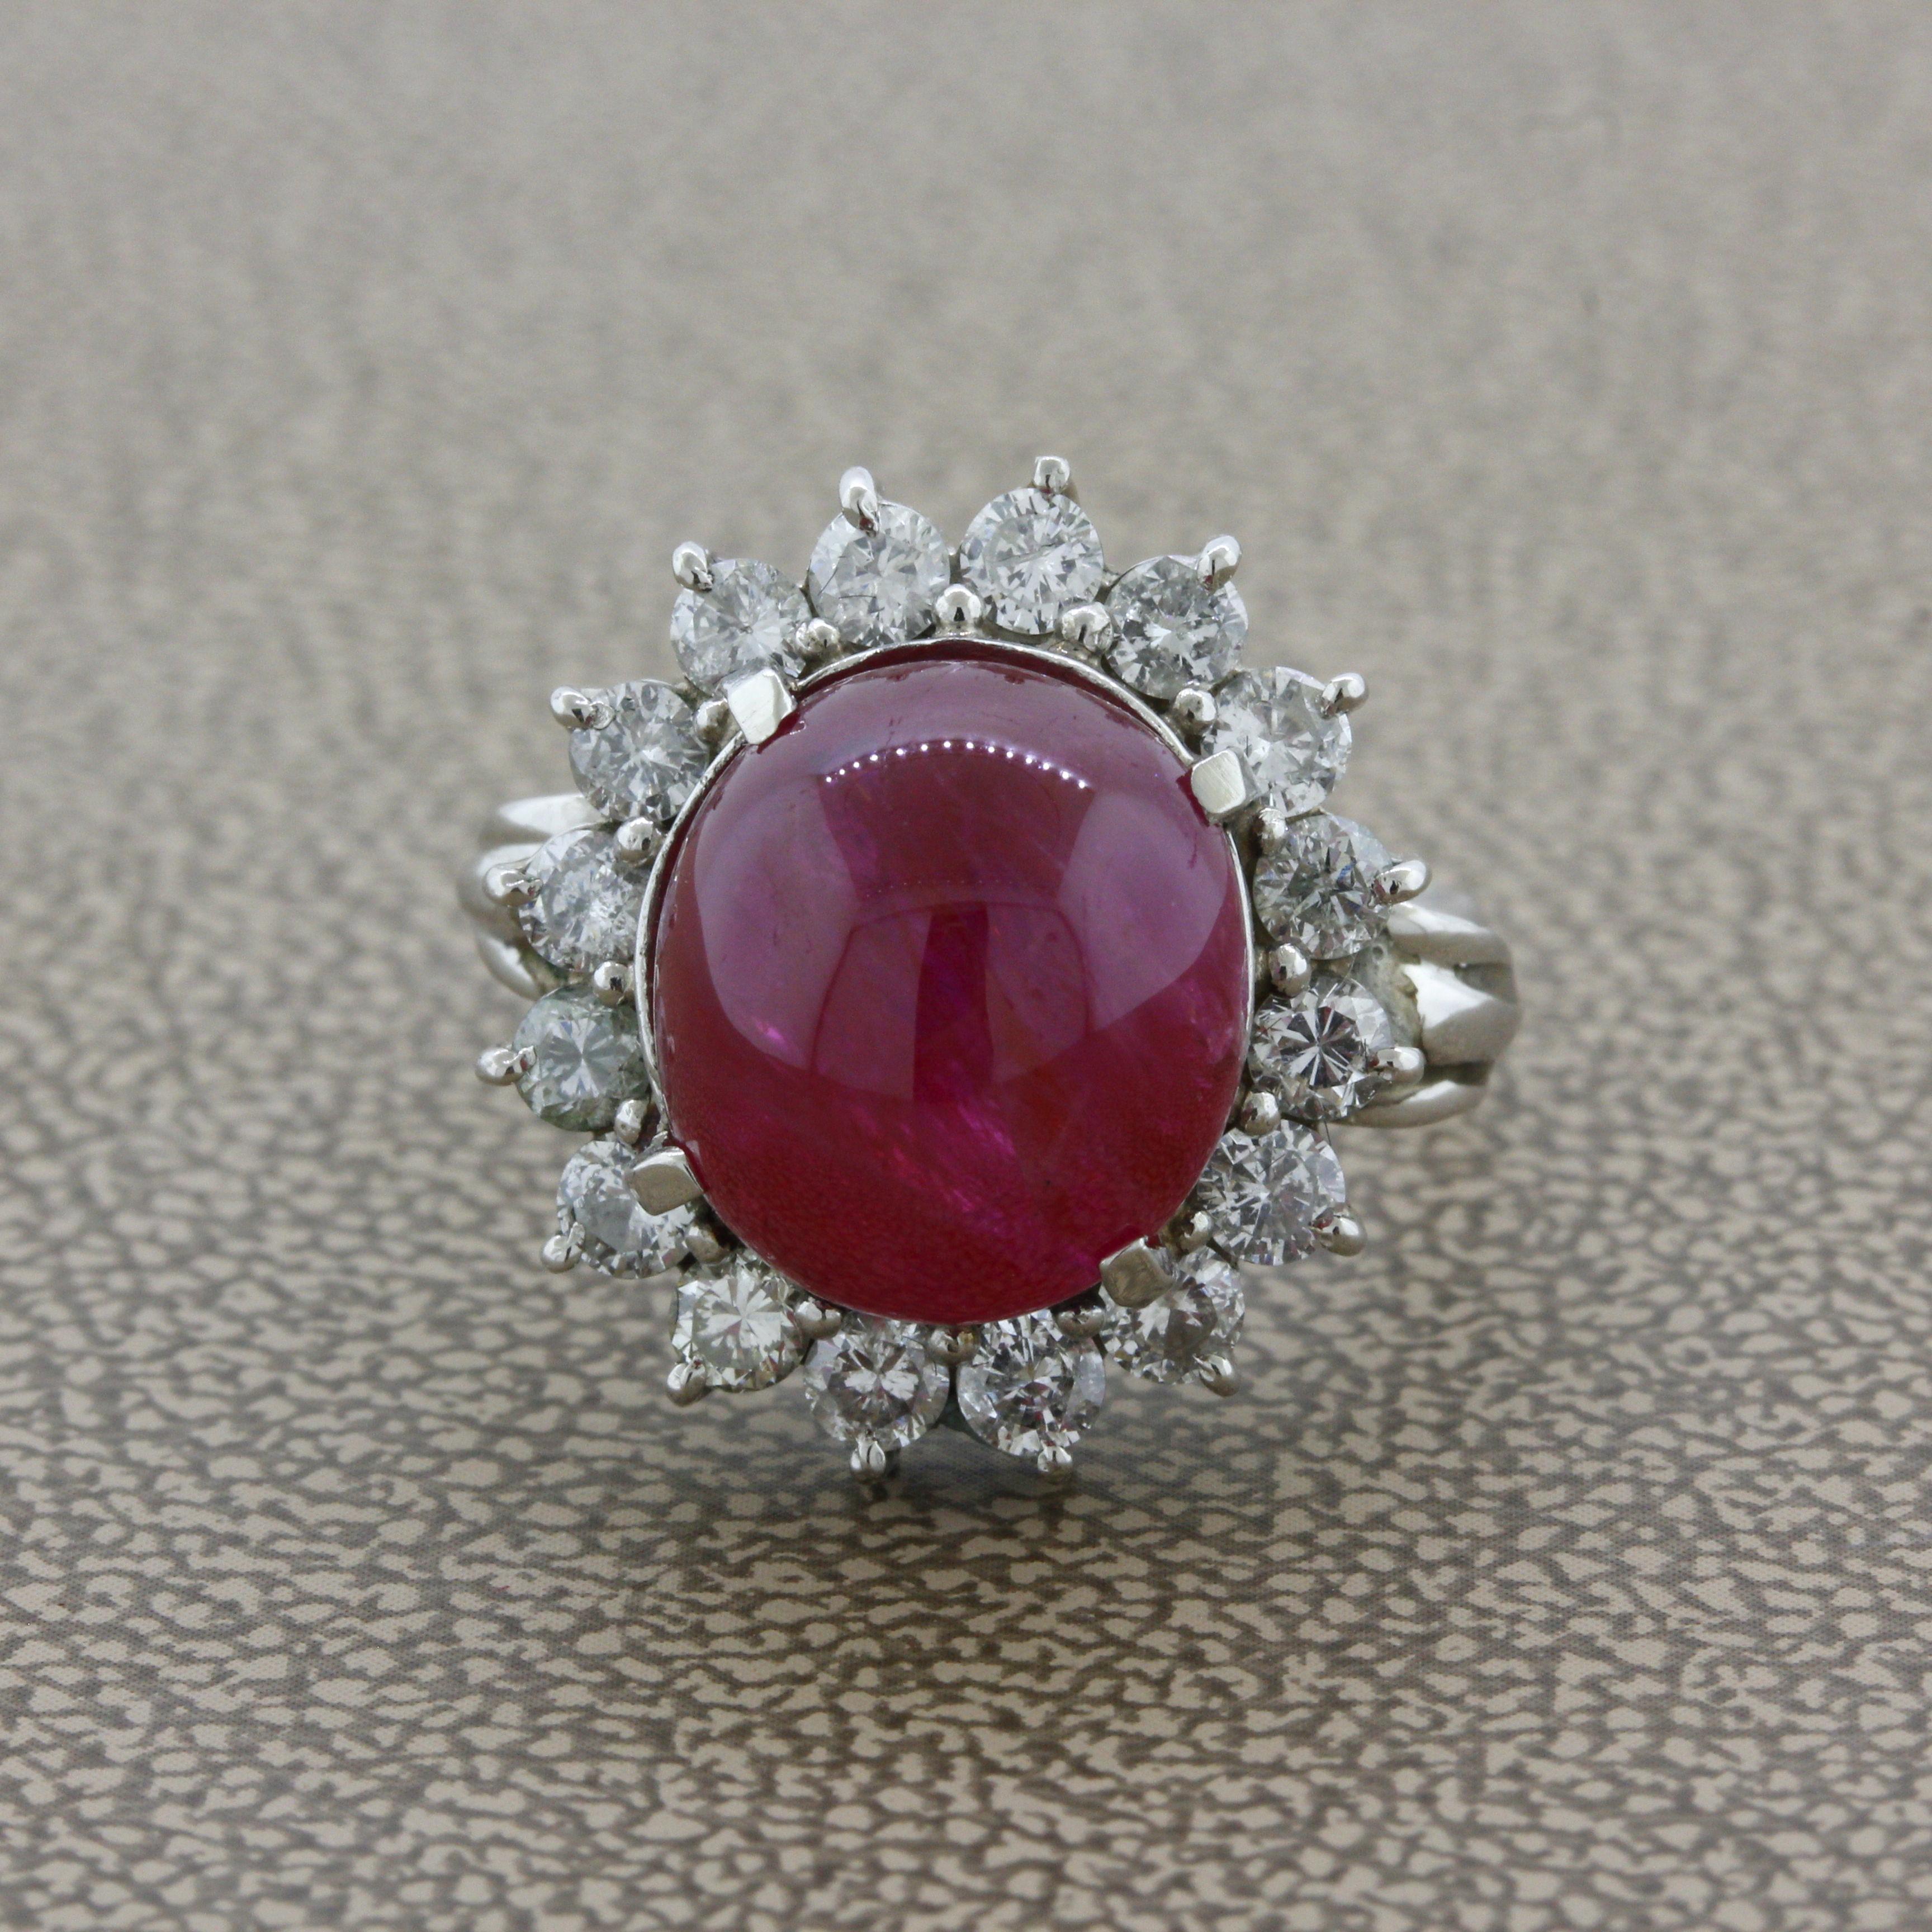 A large and impressive unheated ruby cabochon weighing 10.30 carats takes center stage. It has a rich pure red color along with great translucency making the stone appear to glow. It is complemented by a halo of round brilliant-cut diamonds weighing